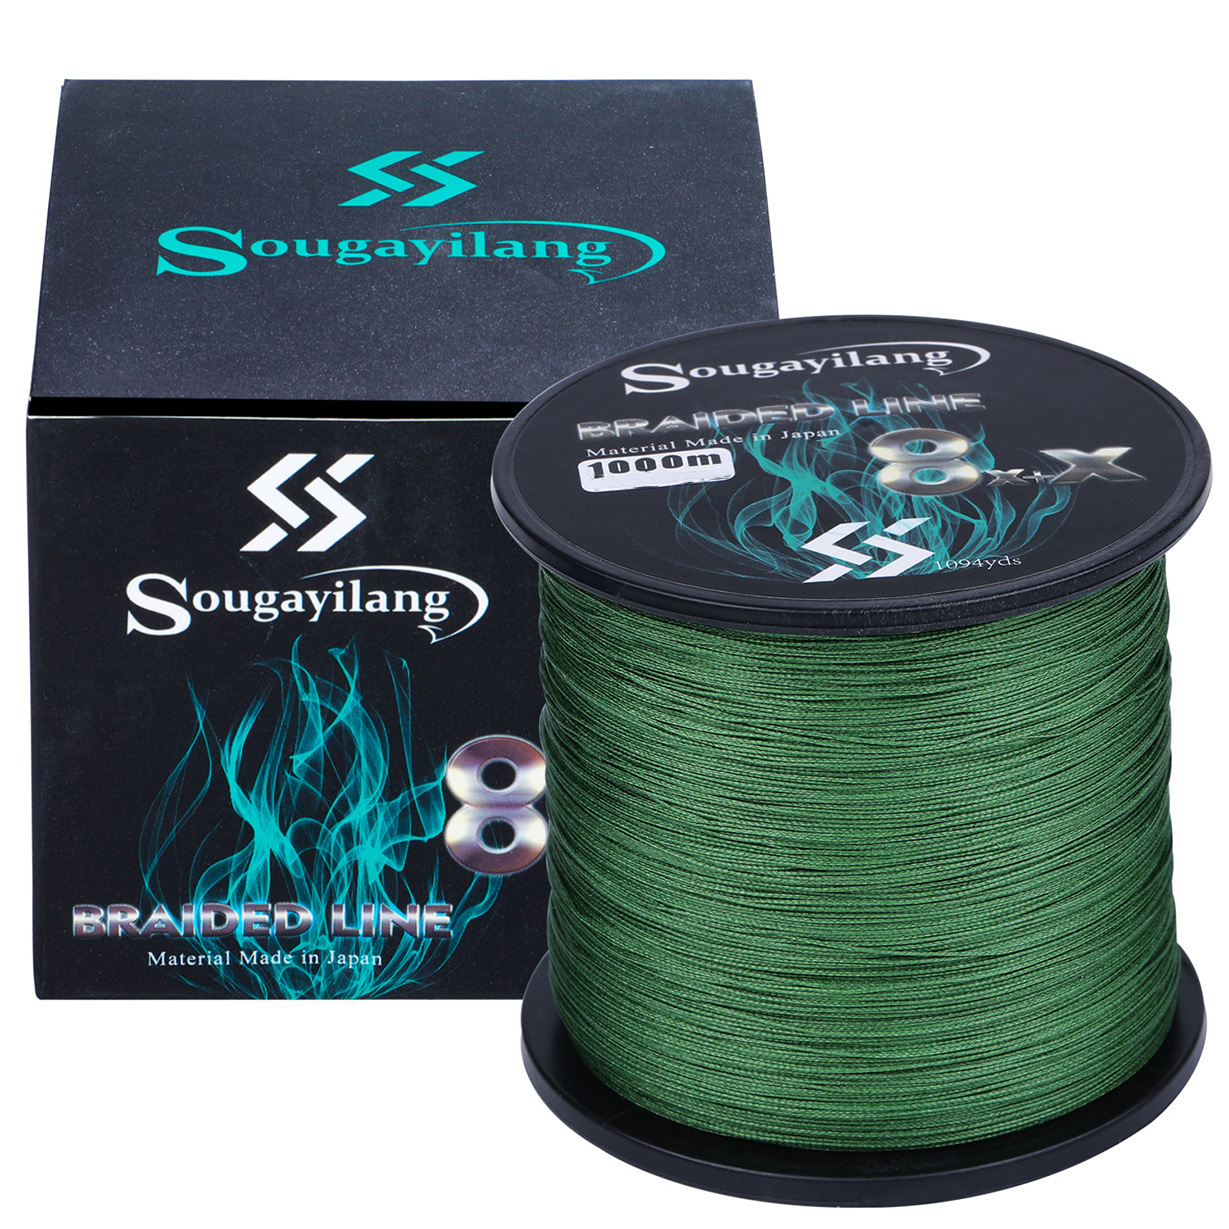 Sougayilang 8 Strands Speckle Pe Braided Fishing Line Strong